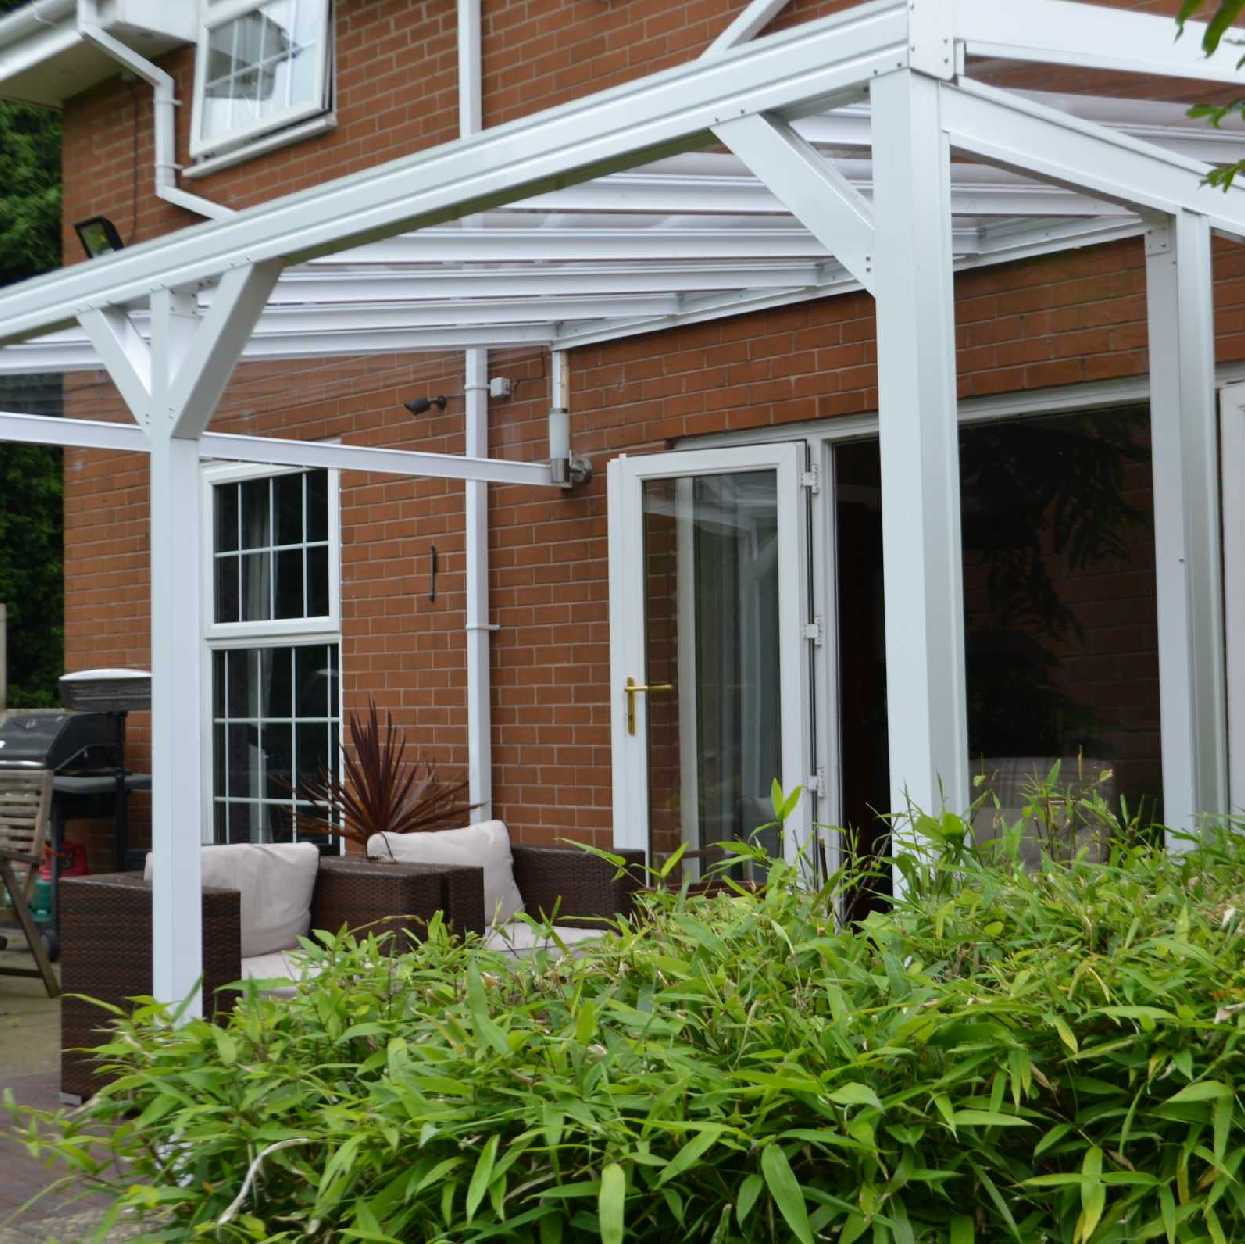 Omega Smart Lean-To Canopy, White with 6mm Glass Clear Plate Polycarbonate Glazing - 2.1m (W) x 2.5m (P), (2) Supporting Posts from Omega Build